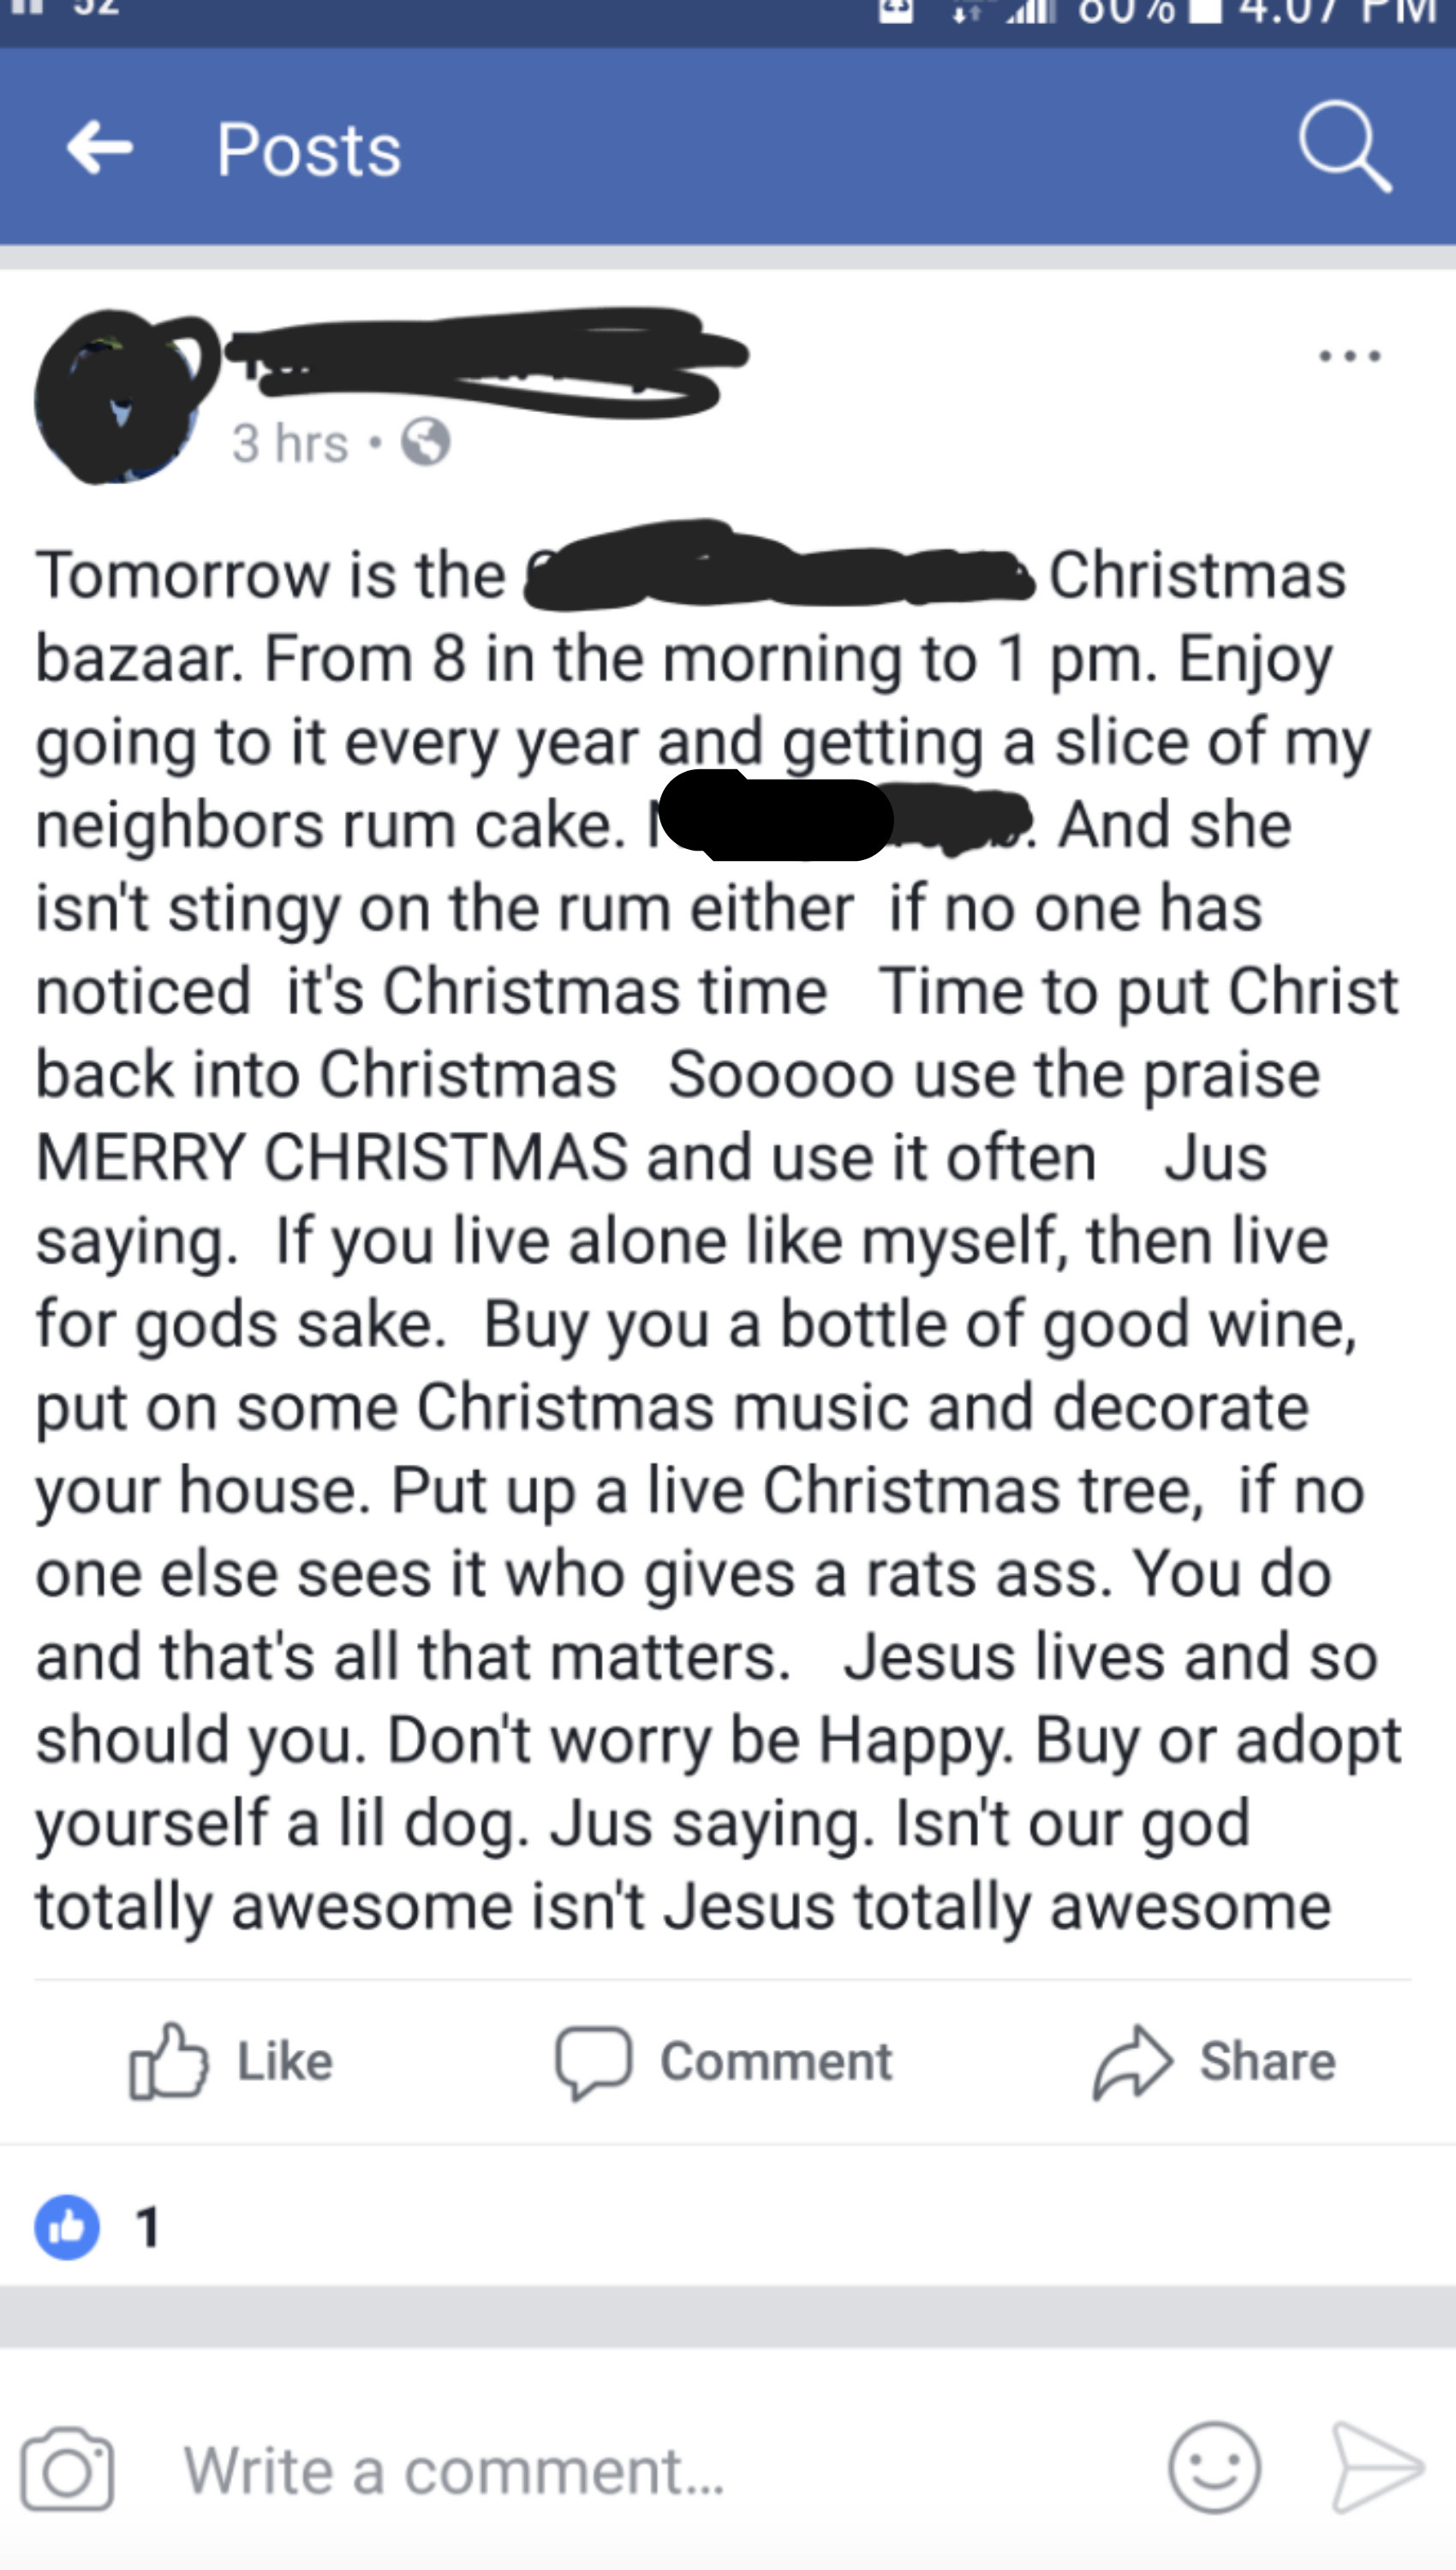 someone going on a rant about it being christmas so even if you live by yourslef you should live and adopt a dog and that jesus is totally awesome